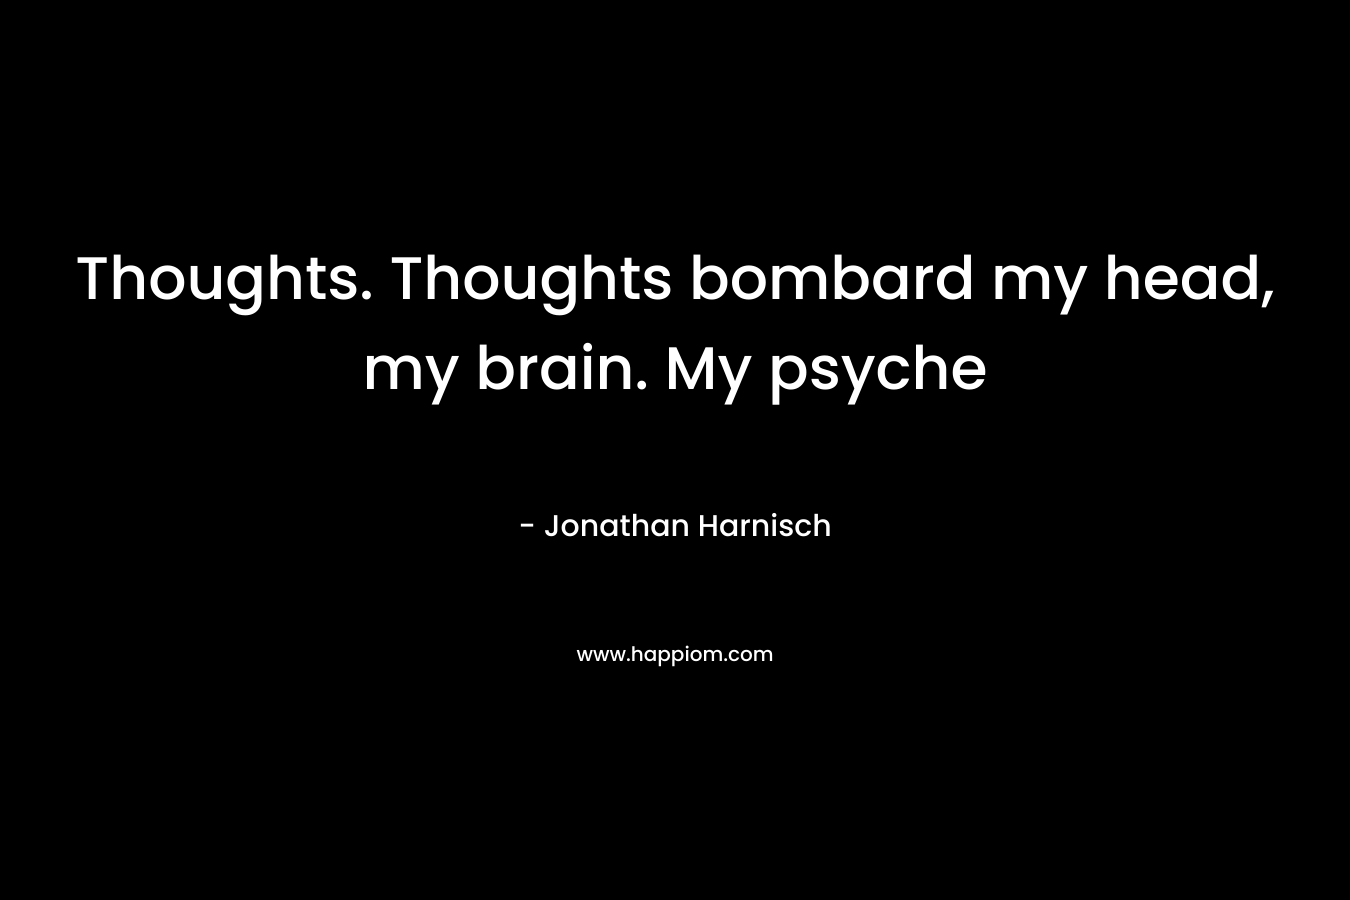 Thoughts. Thoughts bombard my head, my brain. My psyche – Jonathan Harnisch